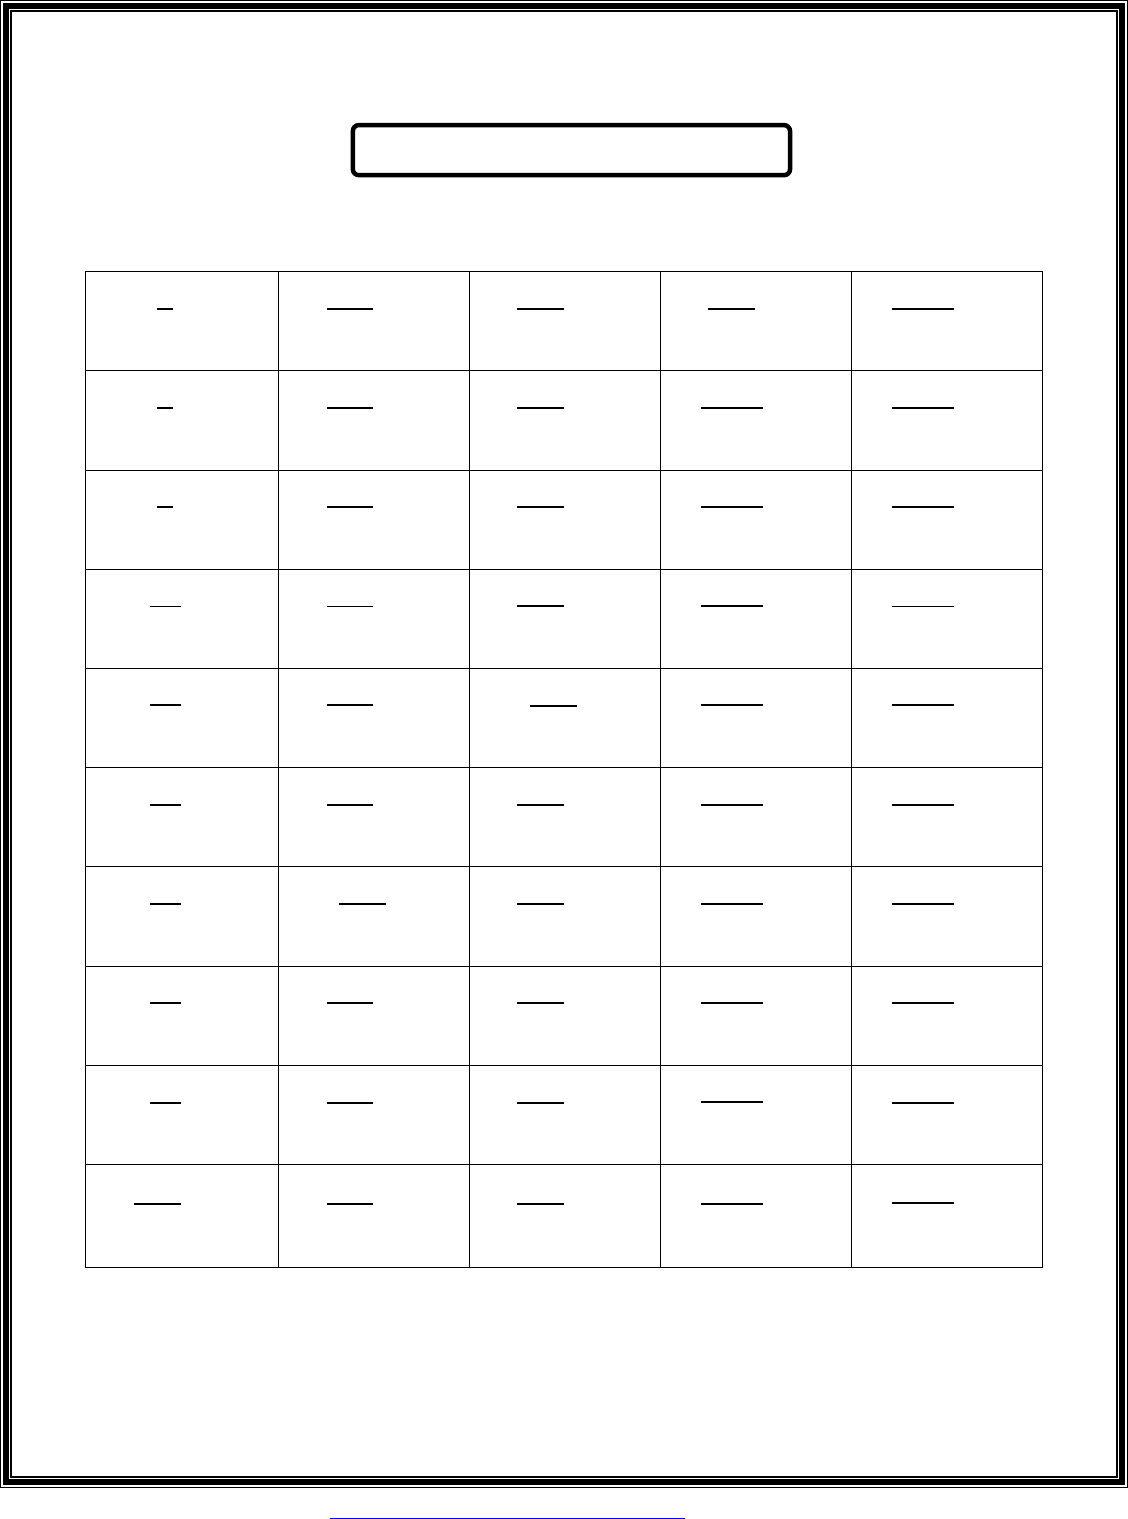 Perfect Square Roots Chart (1 - 50)